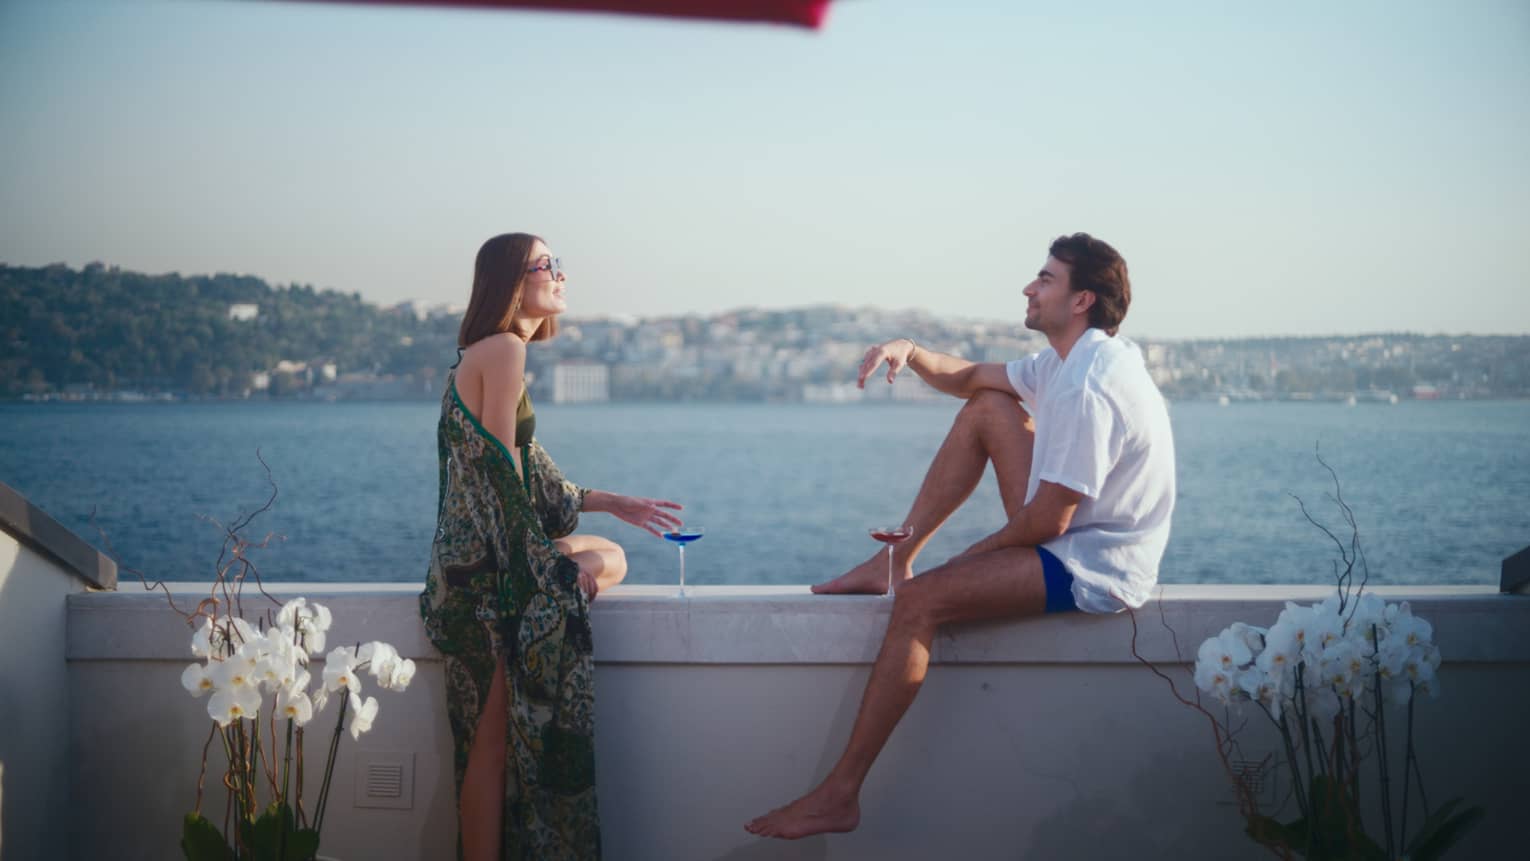 Couple sits facing each other on terrace wall, holding wine glasses, with Bosphorus water view